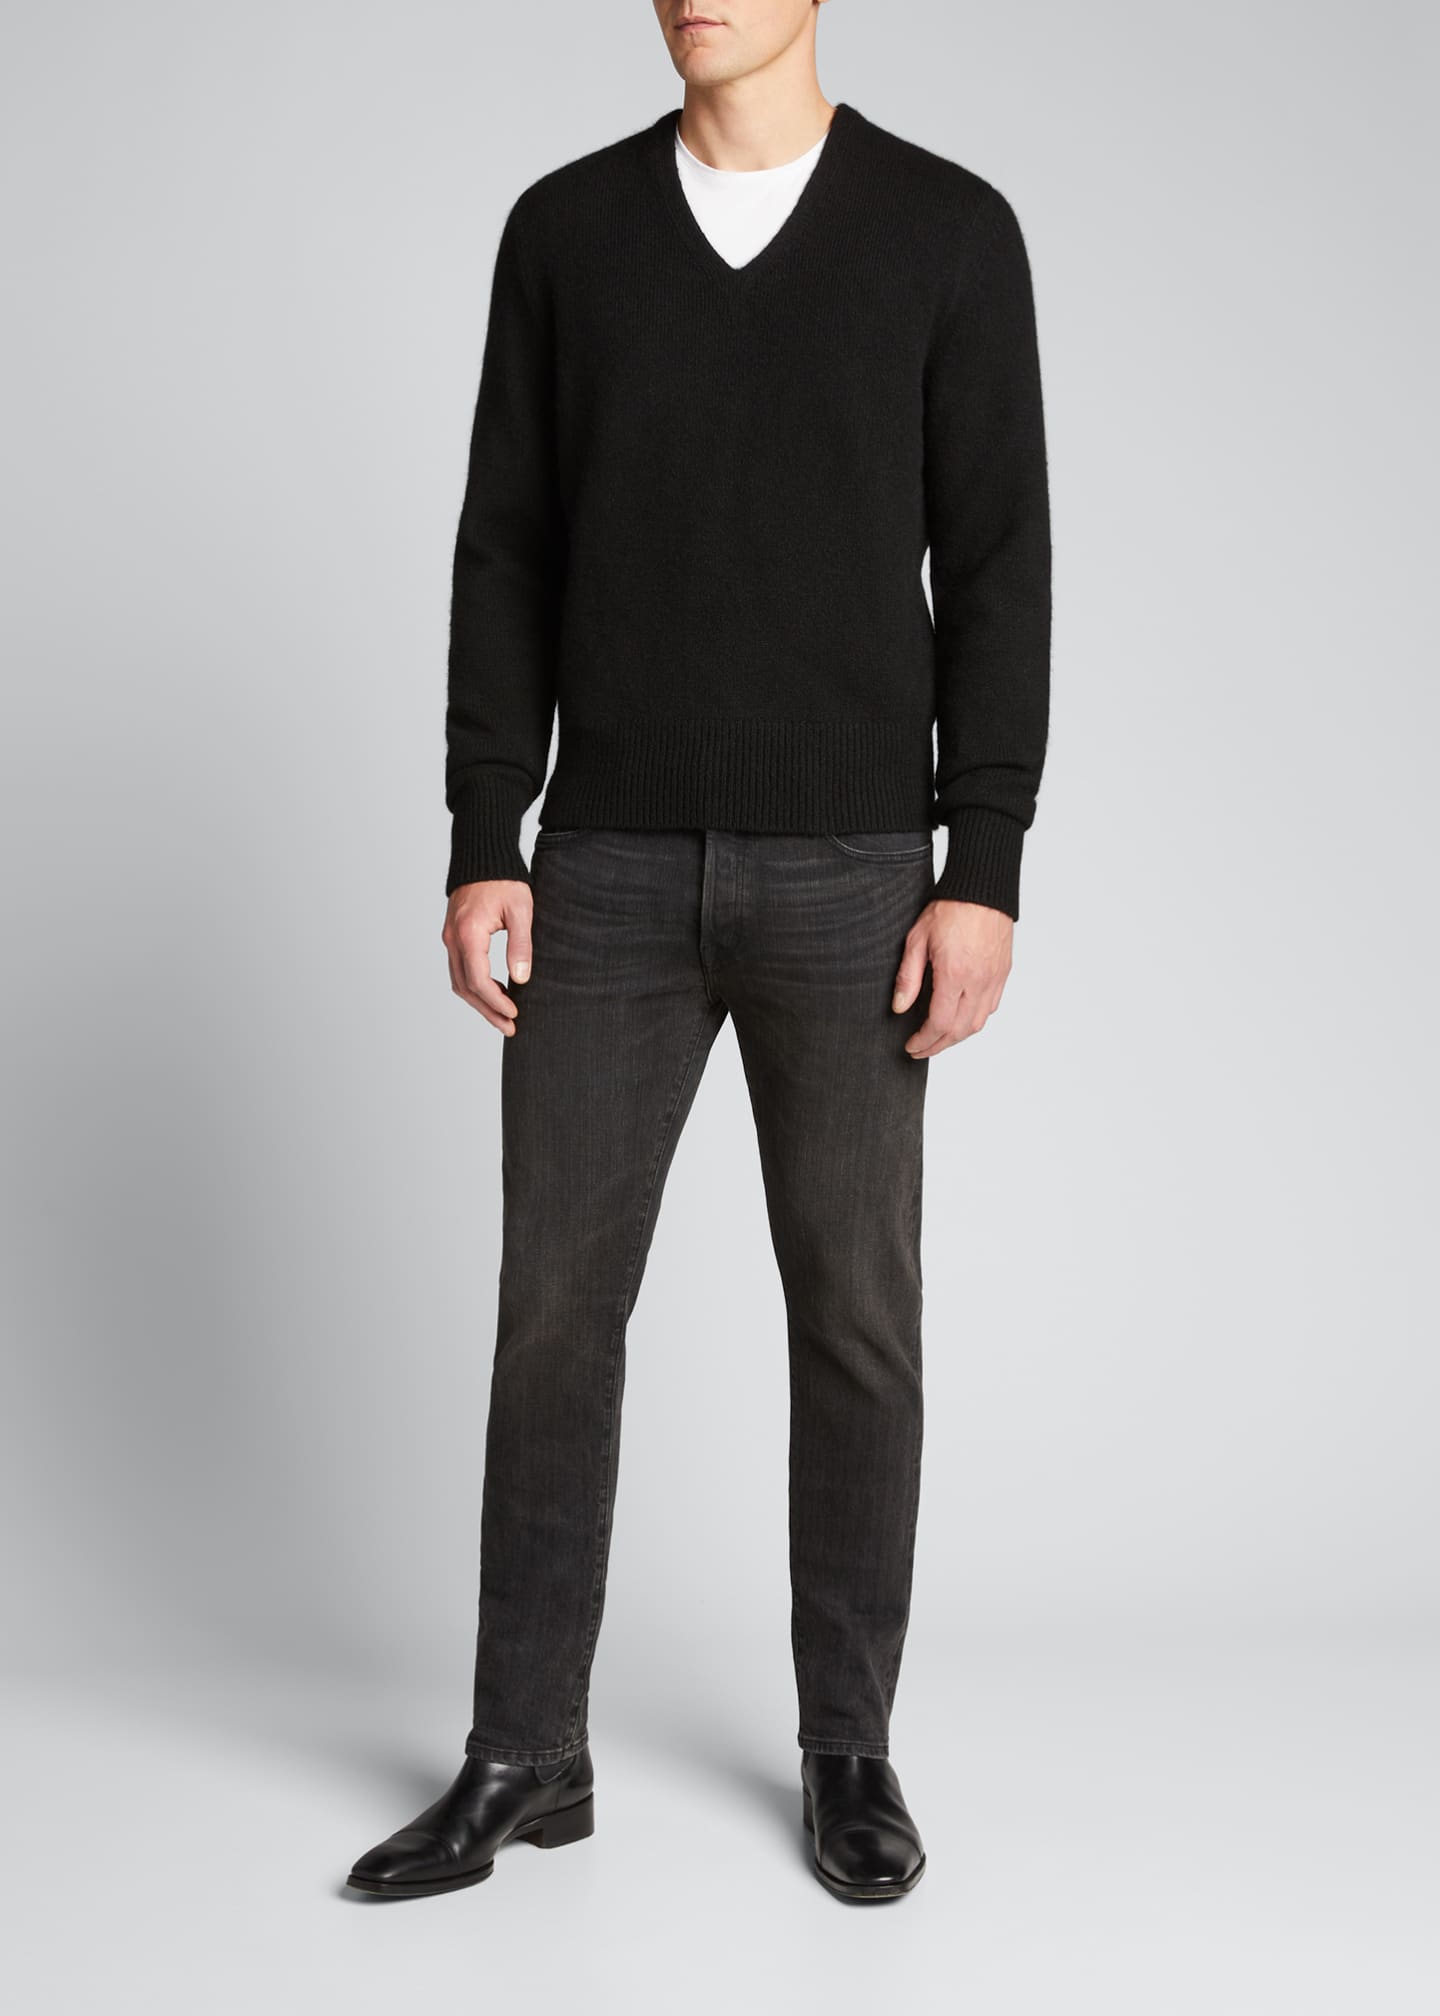 TOM FORD Men's Solid V-Neck Cashmere-Wool Knit Sweater - Bergdorf Goodman